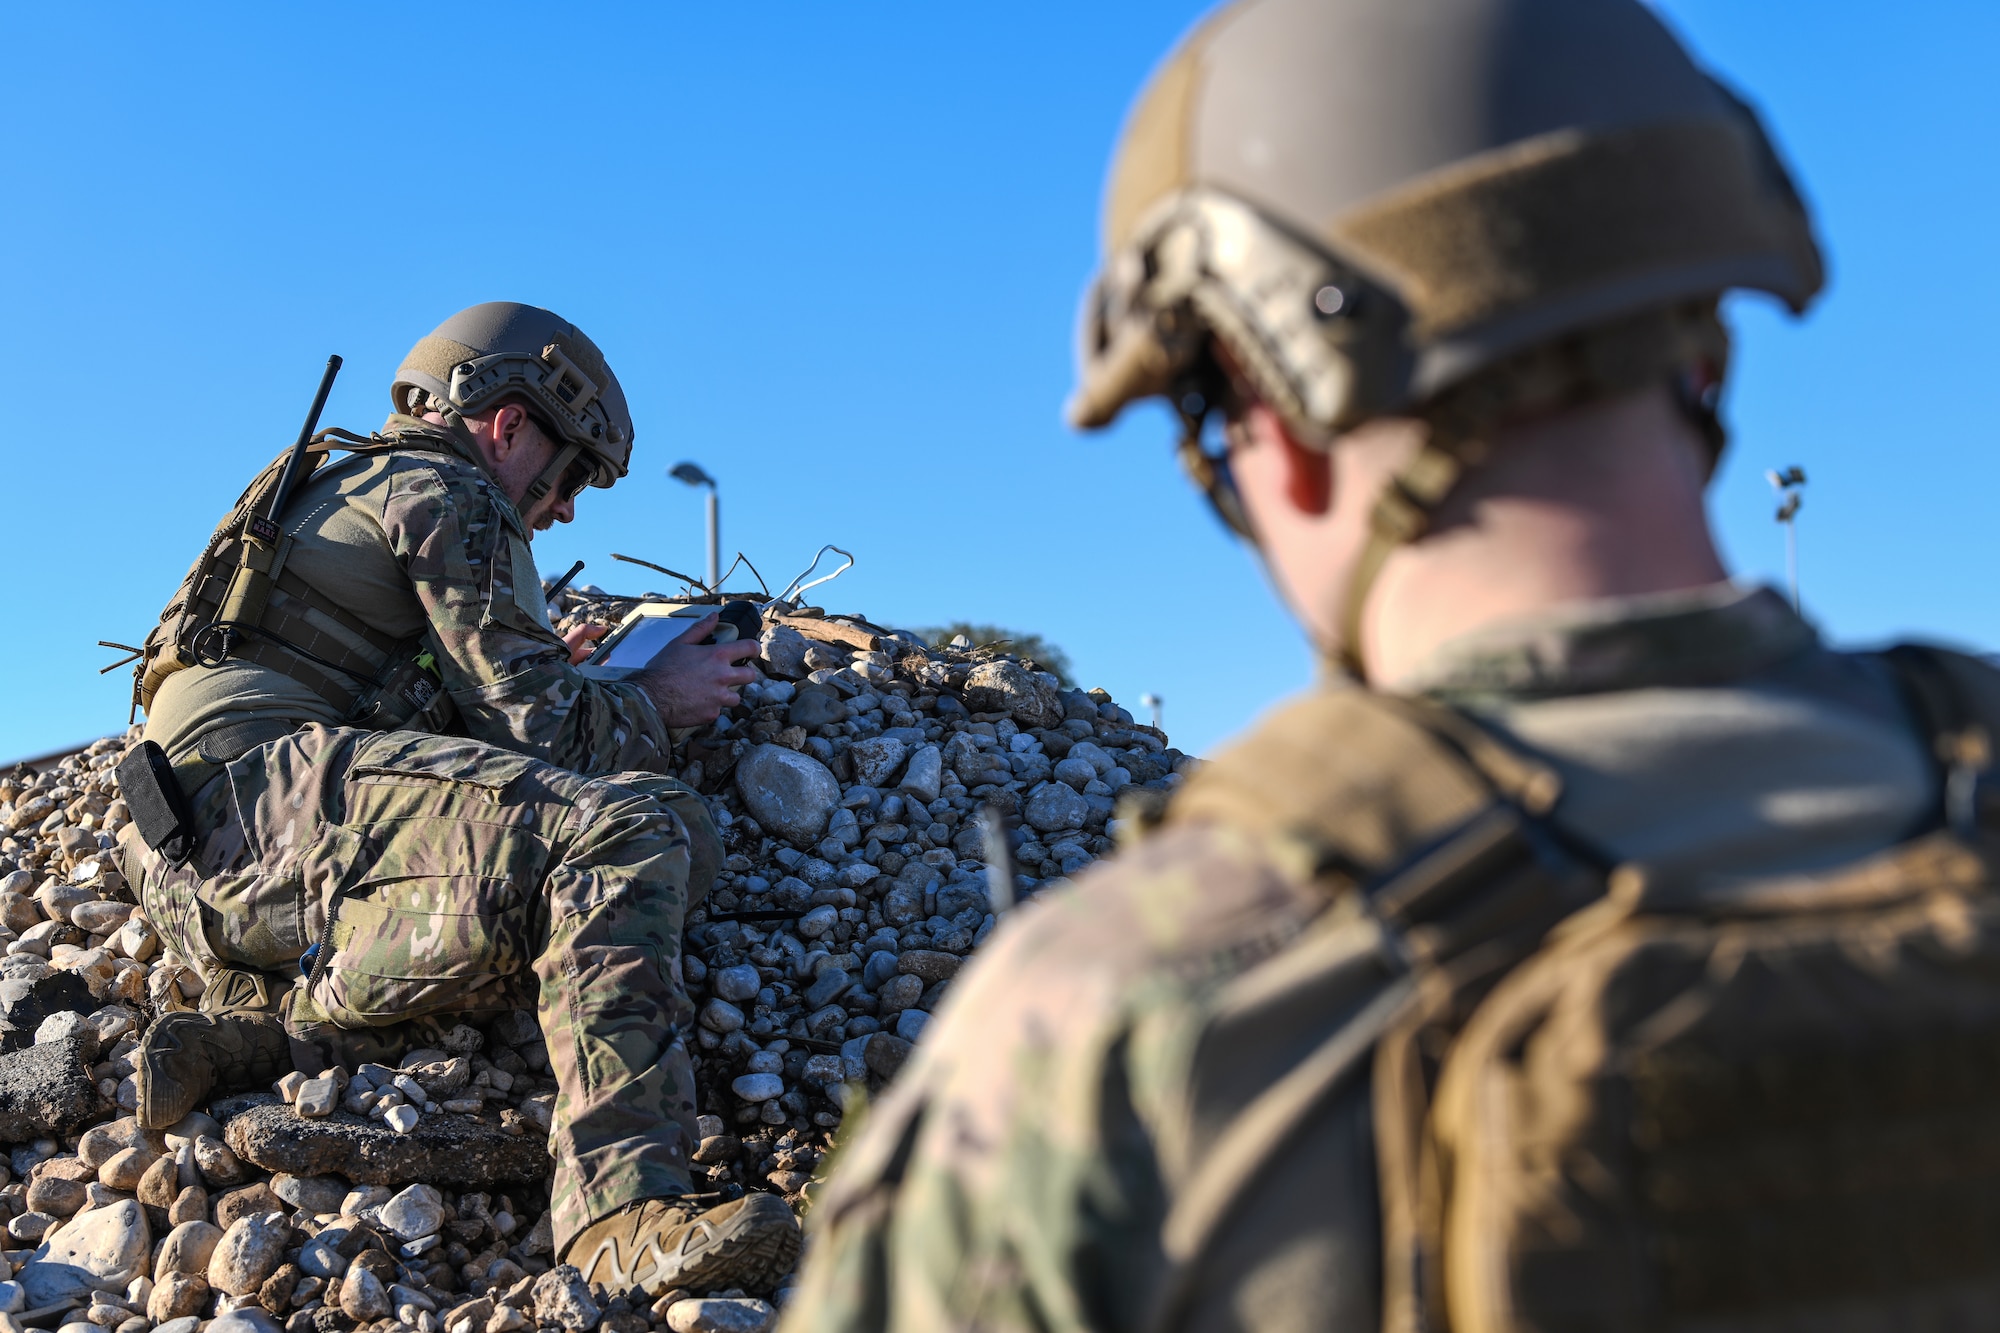 U.S. Air Force Airman 1st Class Tyler McConnell, left, and Senior Airman Colby Forsythe, explosive ordnance team members from the 31 Civil Engineer Squadron, attempt to reconnect the operation control unit to the Micro Tactical Ground Robot during a training exercise at Aviano Air Base, Italy, Jan. 8, 2020. EOD Airmen use the MTGR to carry out reconnaissance missions, identify objects from far distances, locate designated targets and breach a compound. (U.S. Air Force photo by Airman 1st Class Ericka A. Woolever).